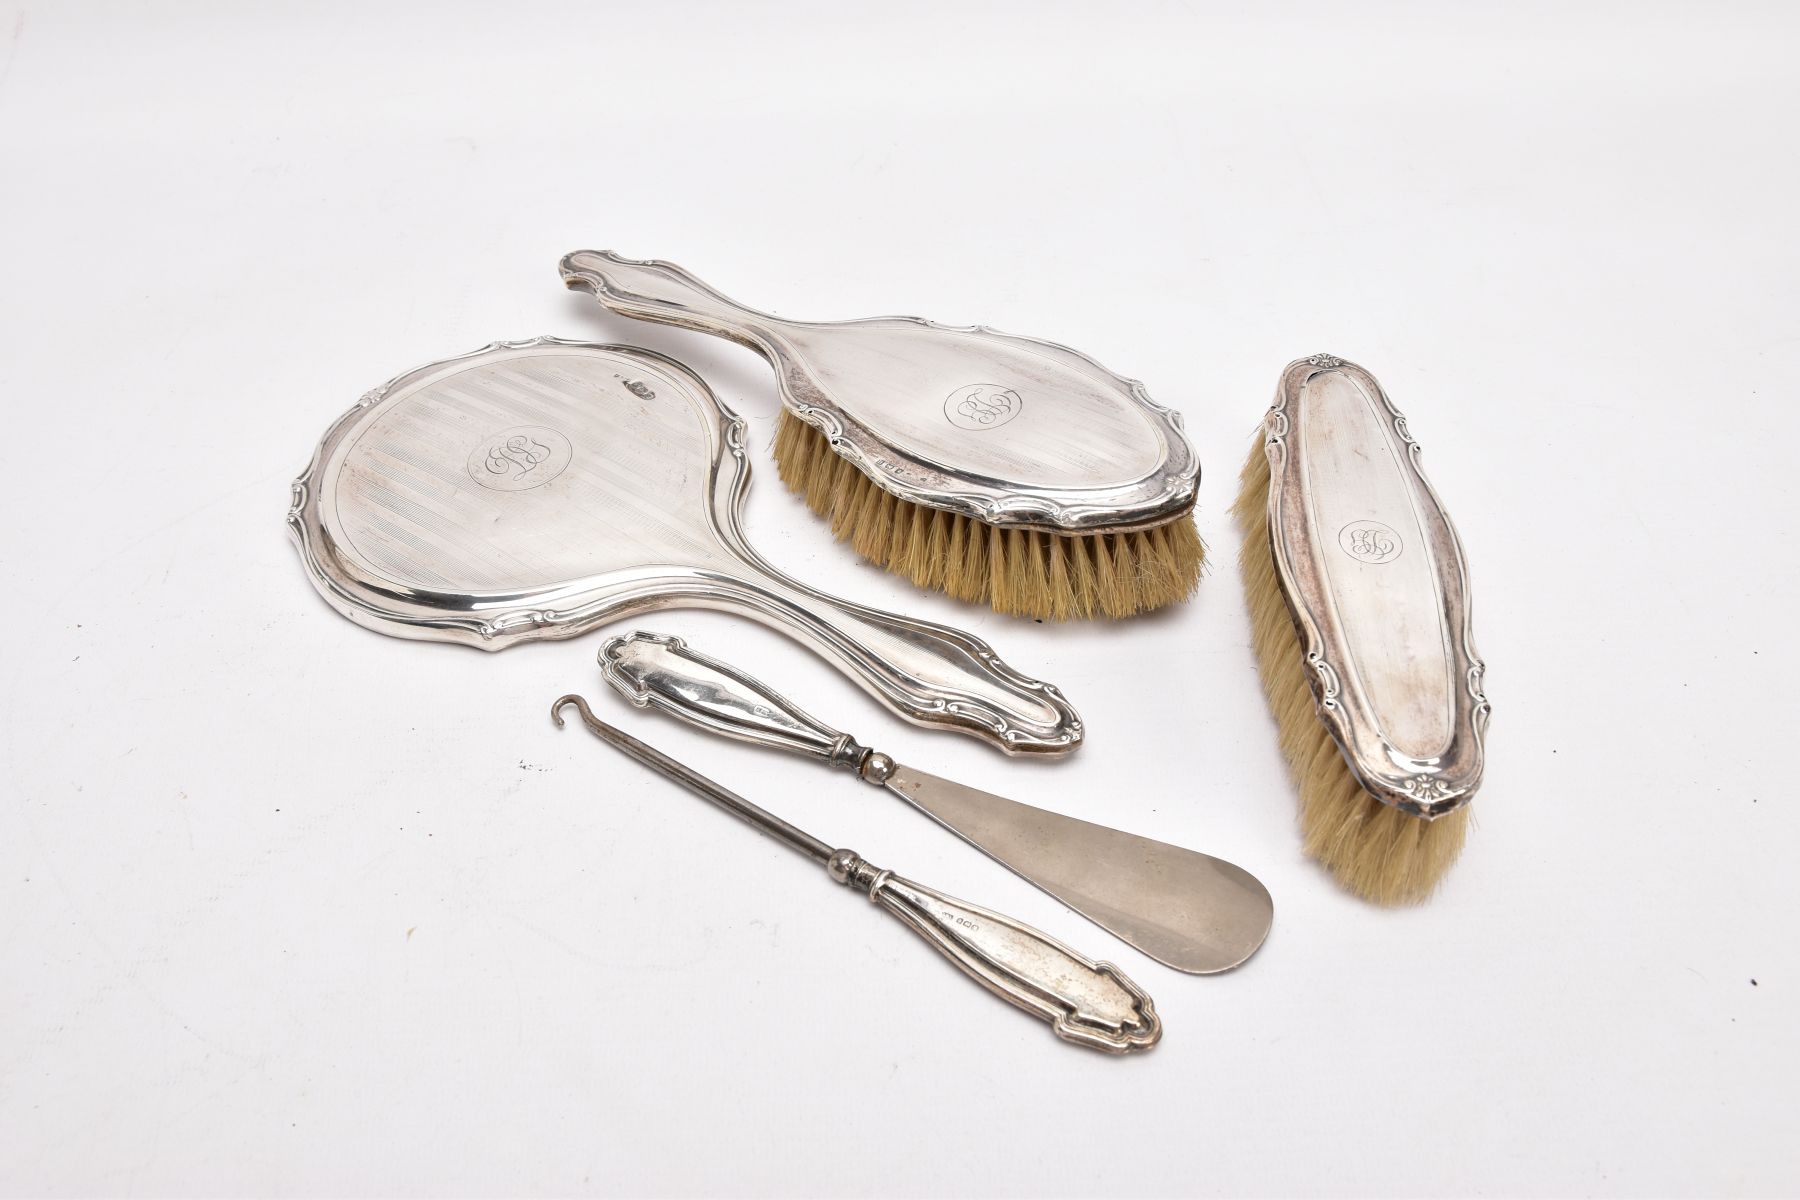 A THREE-PIECE SILVER VANITY SET A BUTTON HOOK AND A SHOEHORN, the vanity set comprising of a